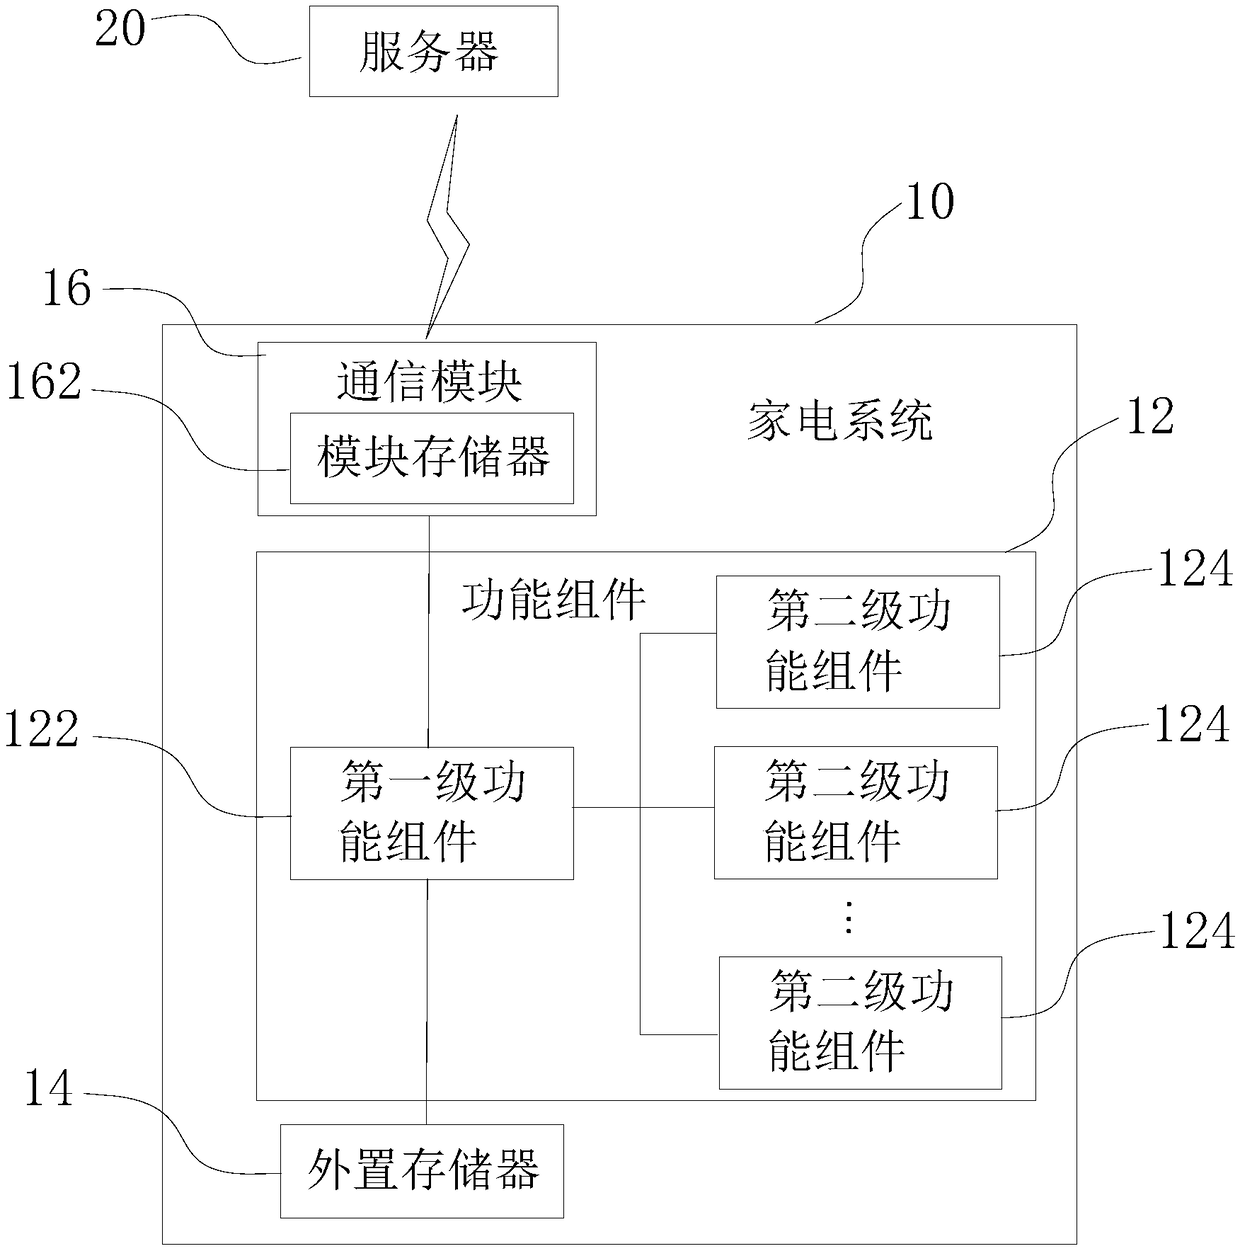 On-line upgrading control method of household appliance system and household appliance system